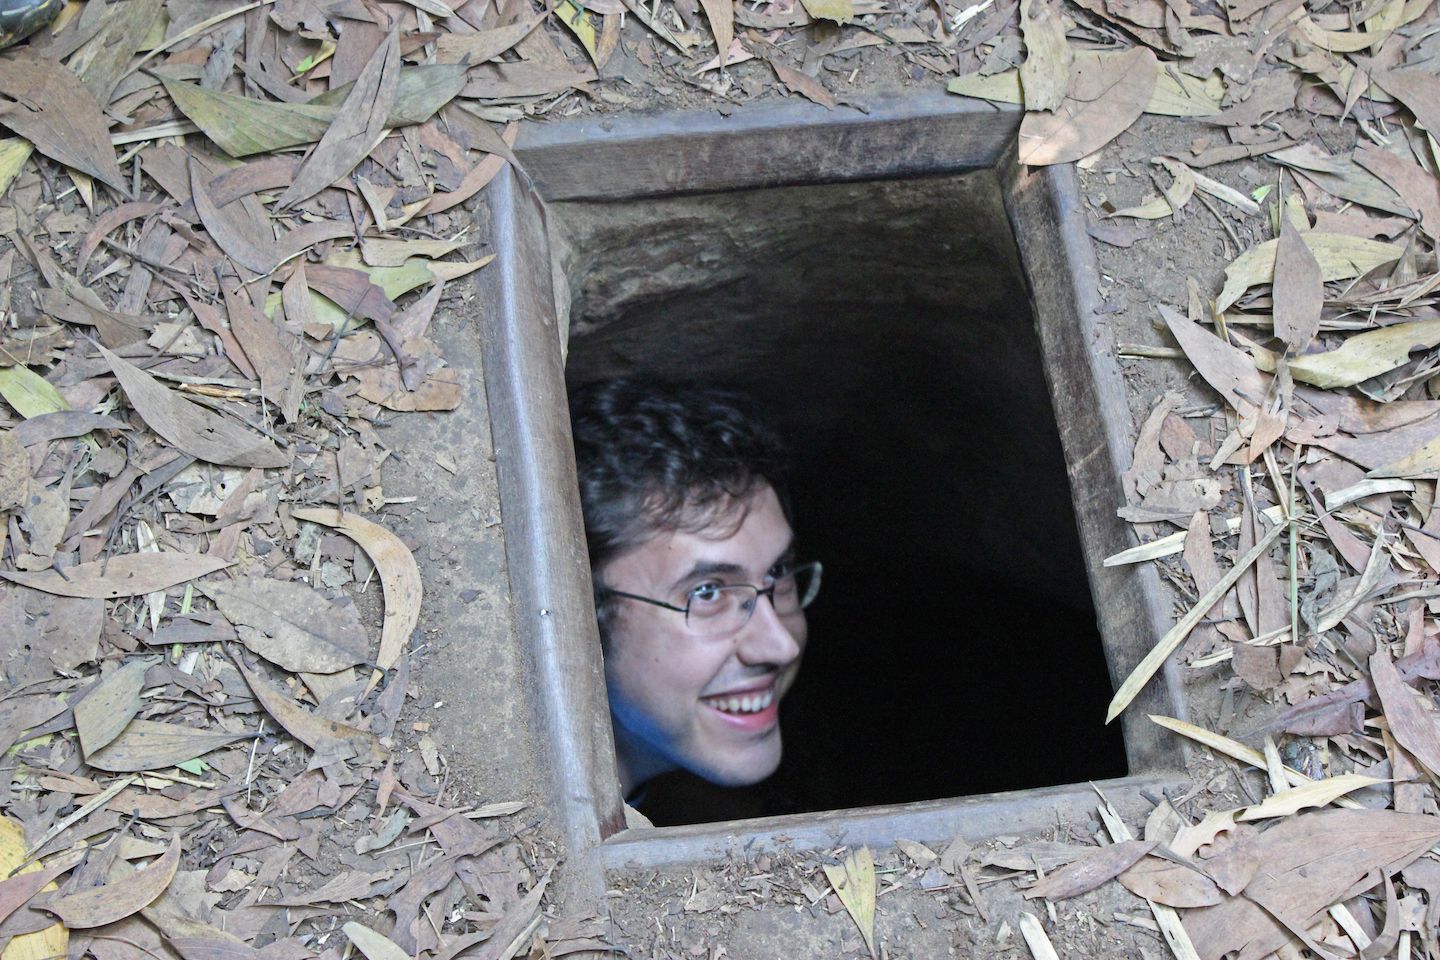 Carlos inside the tunnel network